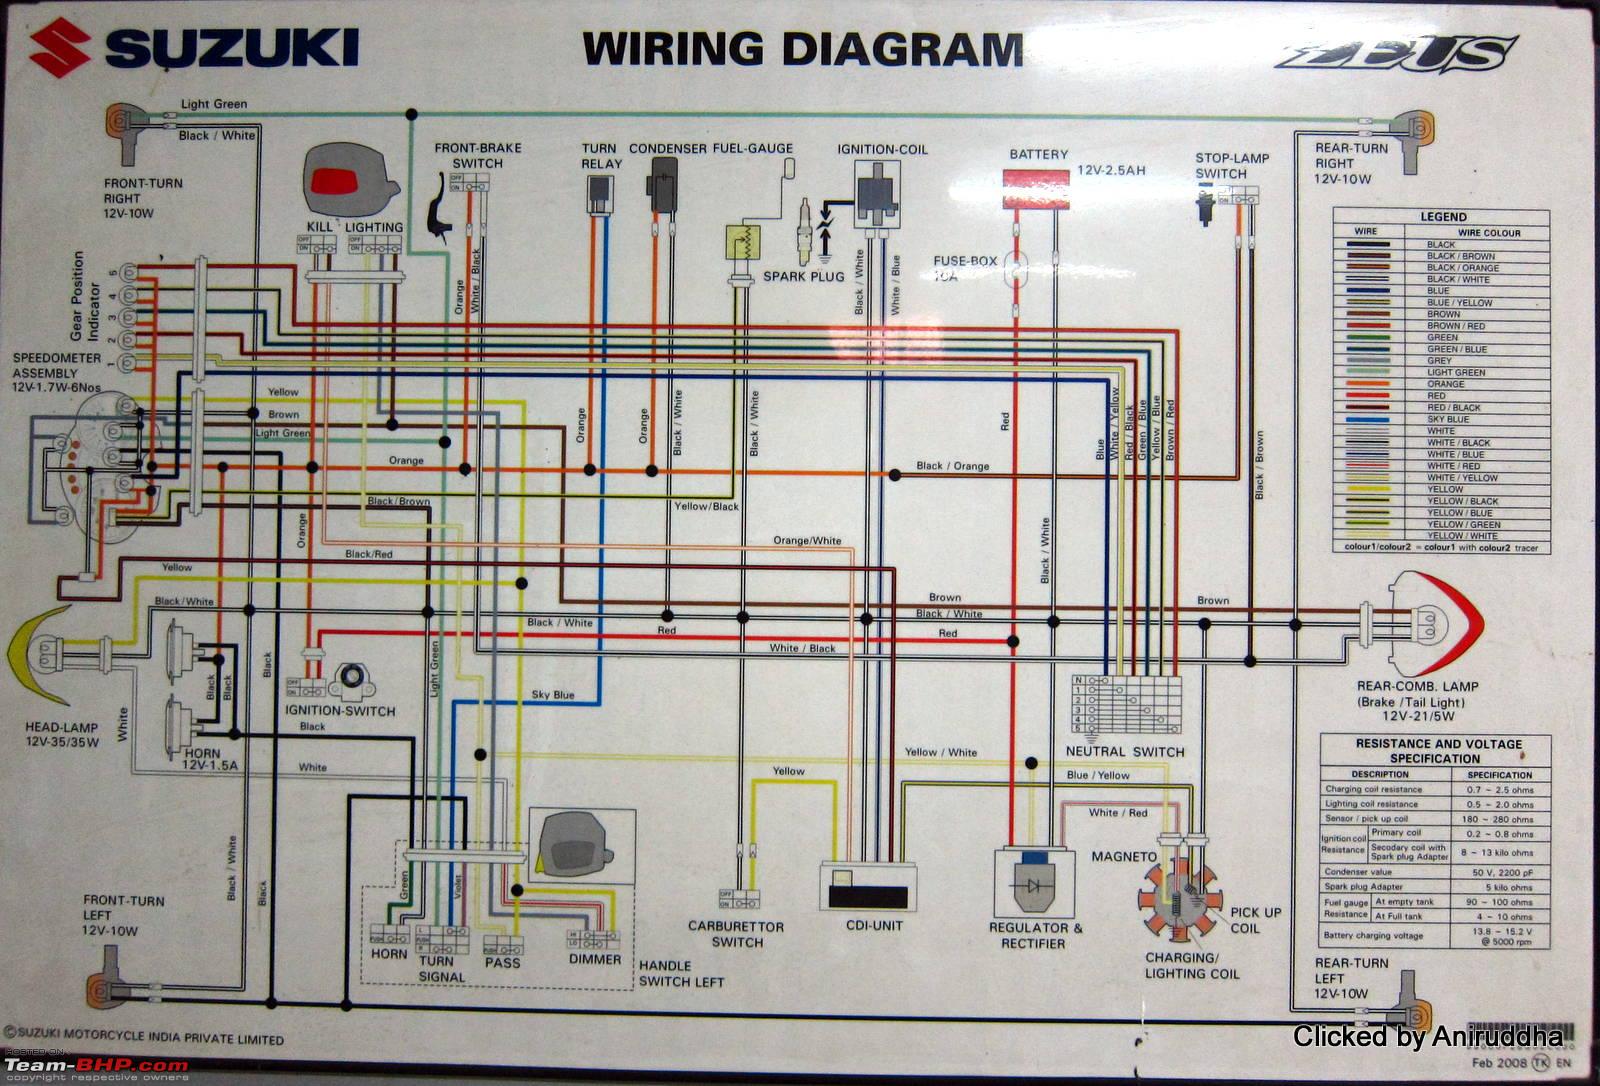 Circuit Diagrams of Indian Motorcycles and Scooters - Team-BHP suzuki a50 wiring diagram 